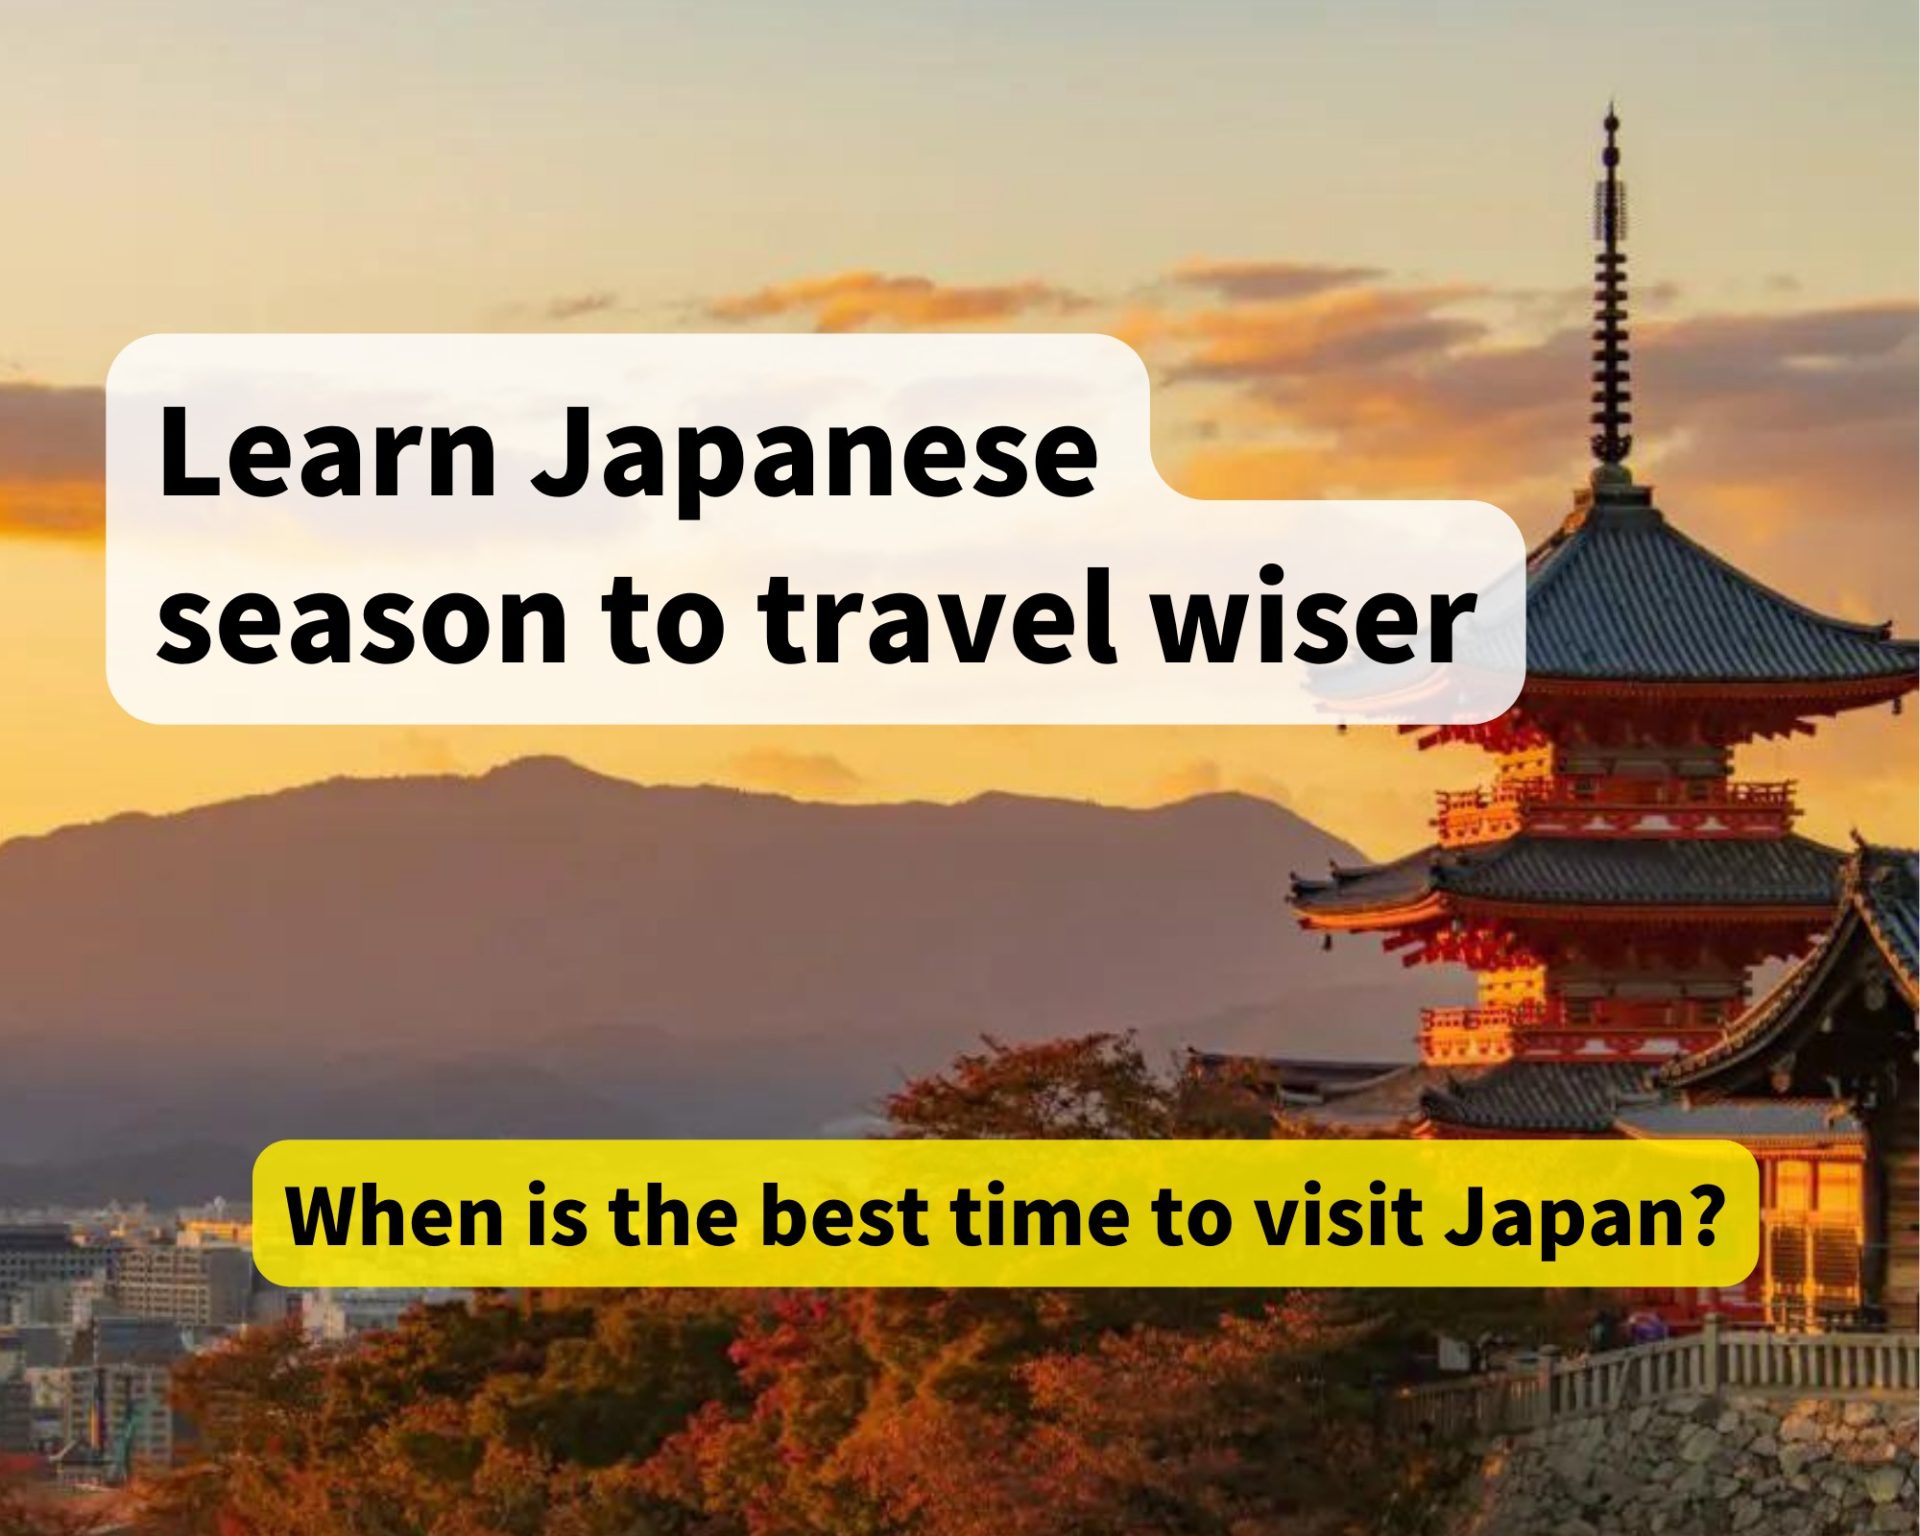 Best Times to Visit Japan